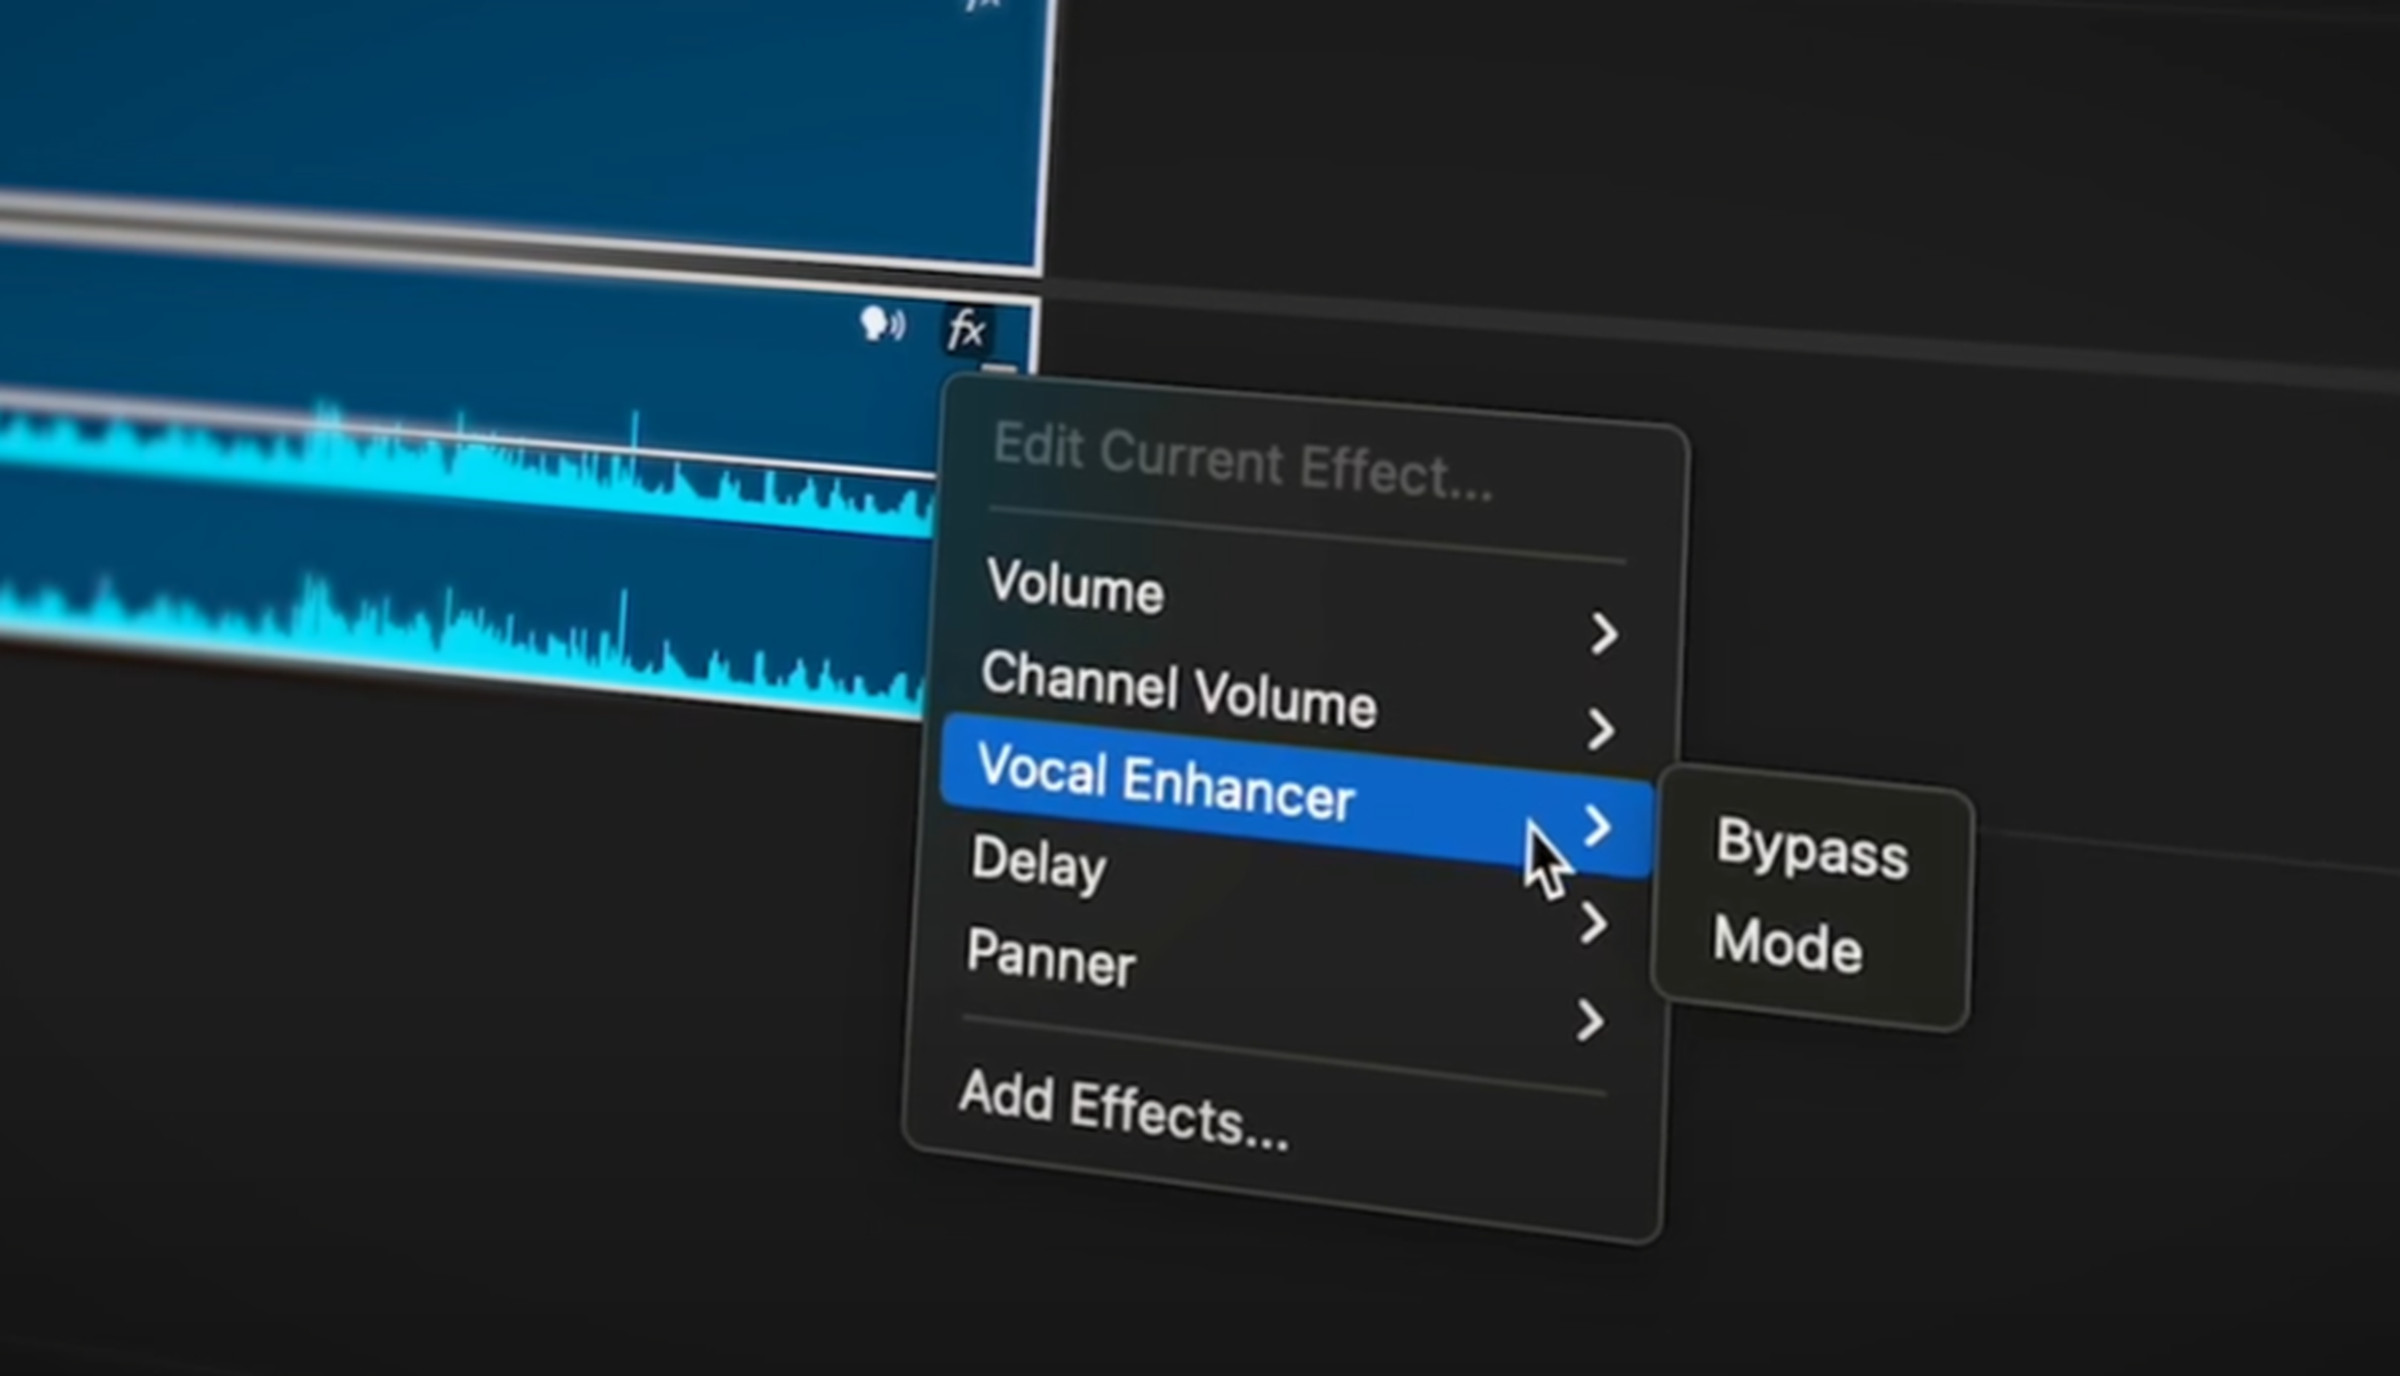 A screenshot taken of the updated clip badges in Premiere Pro that make it easier to apply audio effects from the timeline.